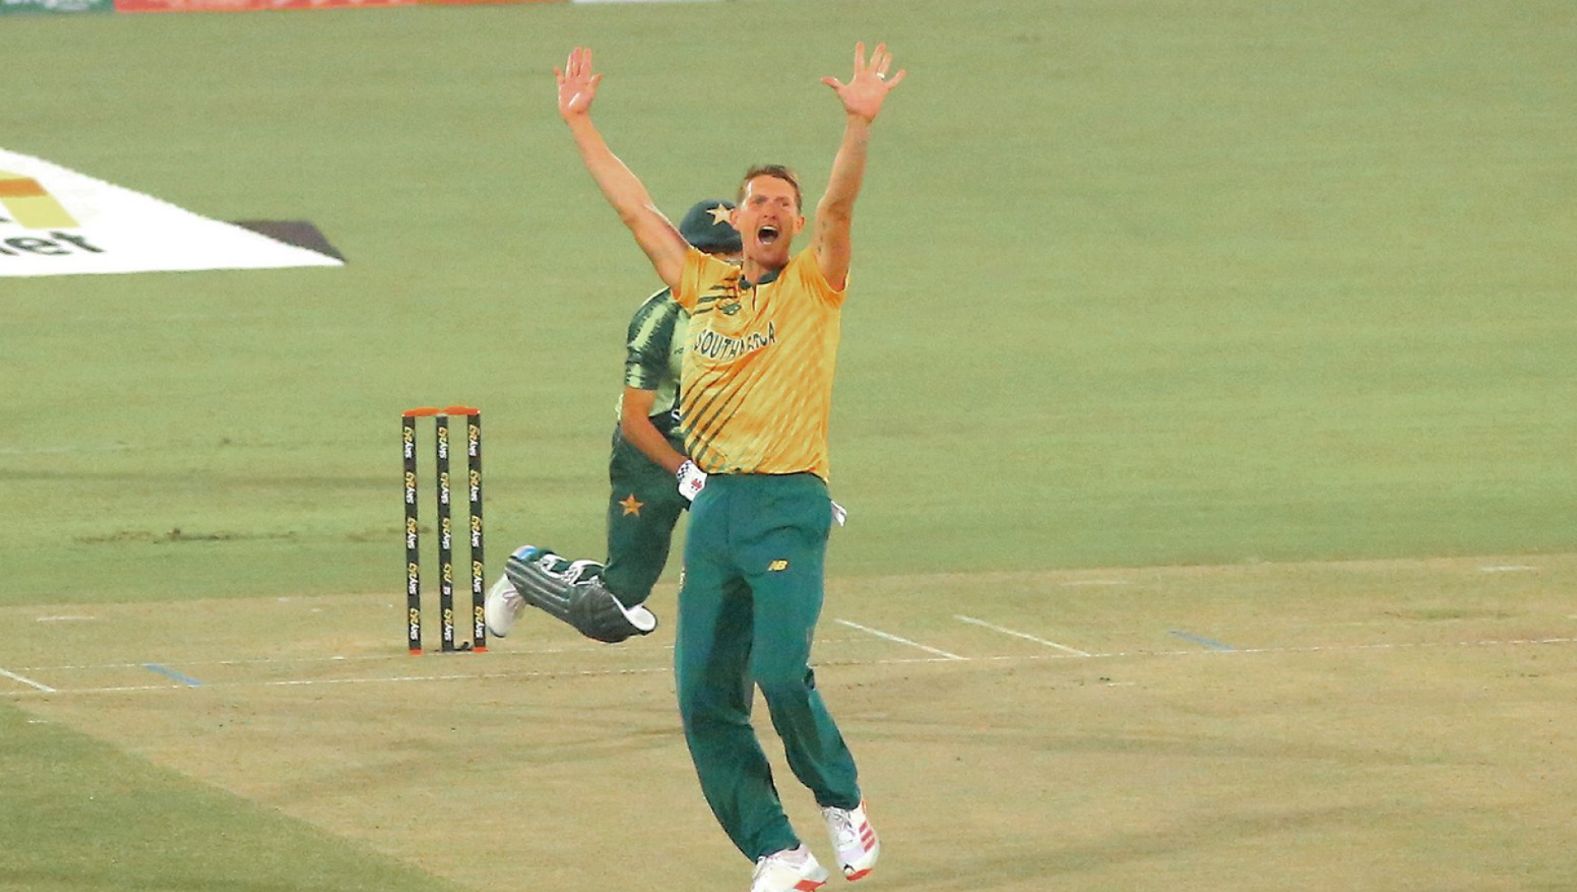 Dwaine Pretorius' record-breaking spell helps young Proteas pin down Pakistan